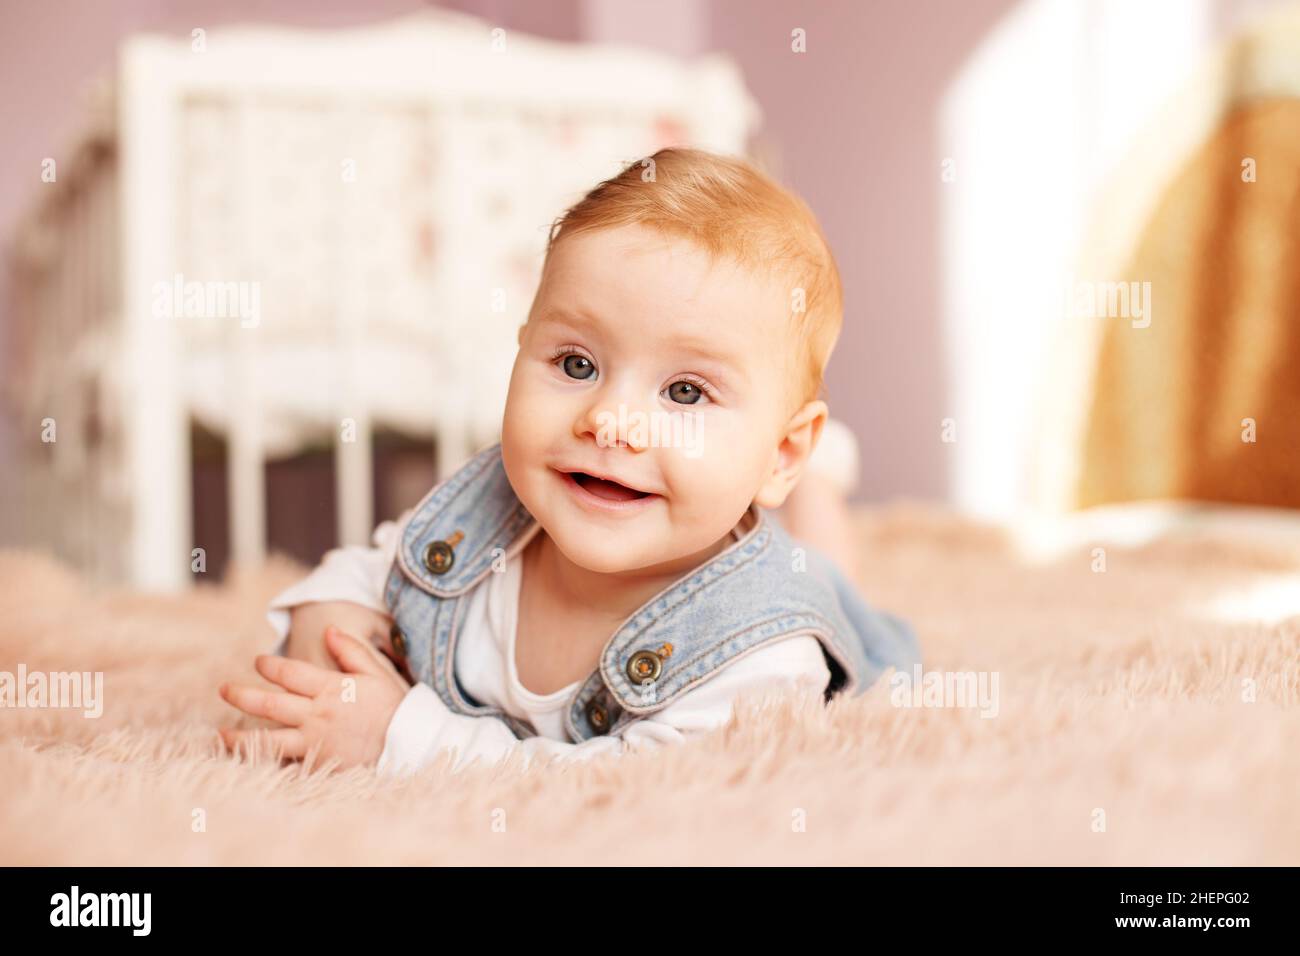 Newborn 5 months old lies on bed on stomach. Baby girl smiles and plays in room. Denim sundress. Soft bedspread. Stock Photo